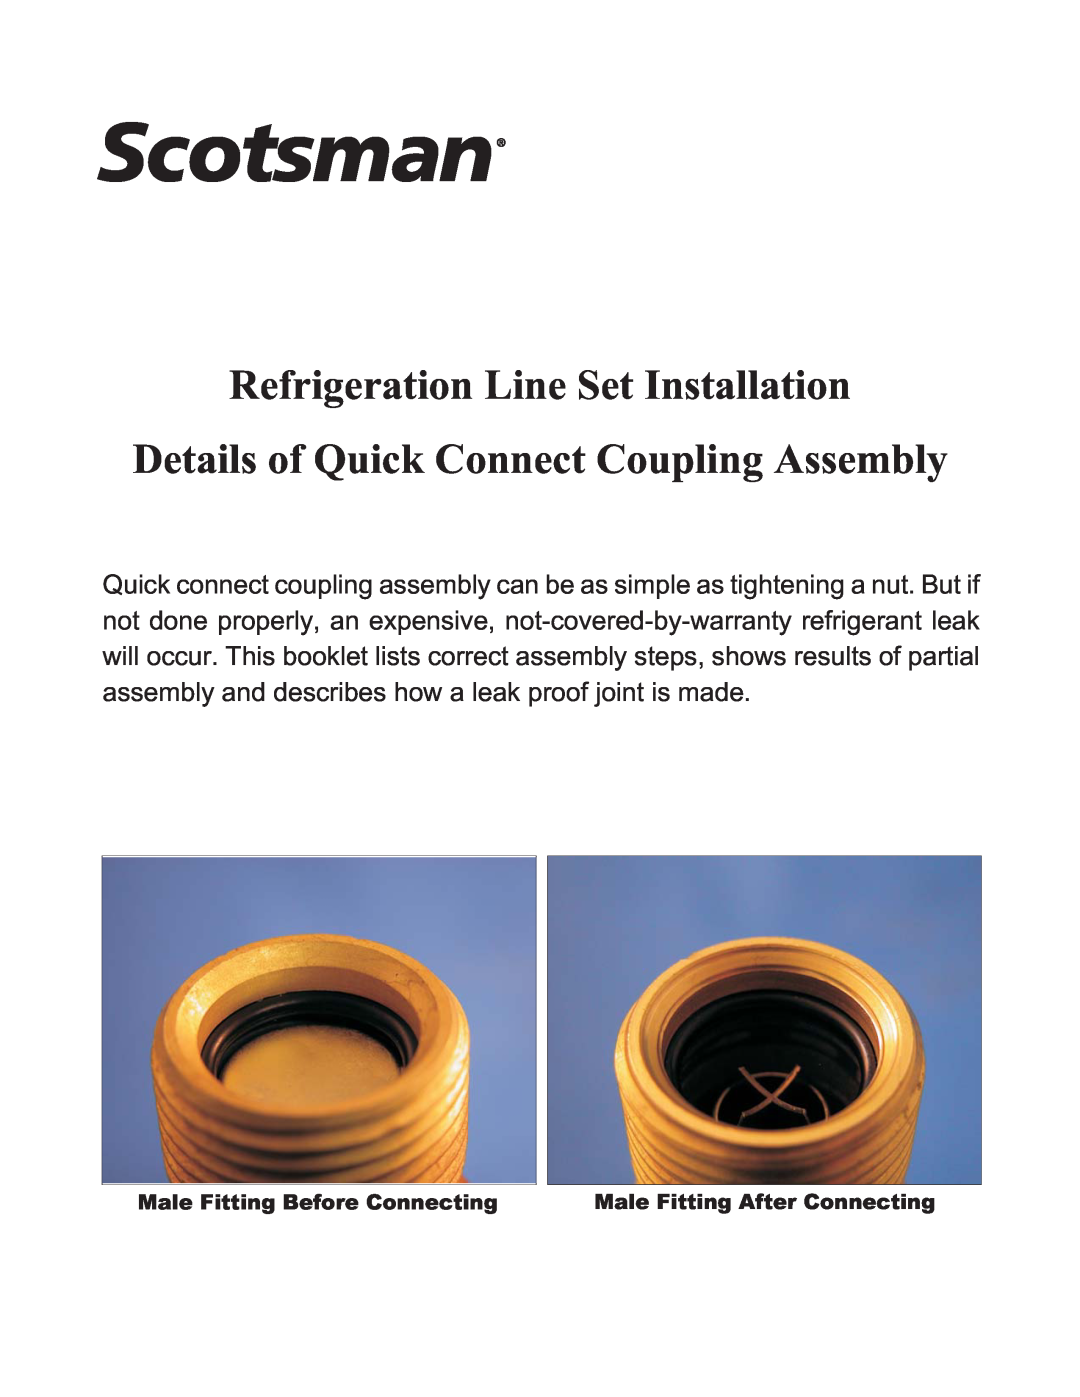 Scotsman Ice none warranty Refrigeration Line Set Installation, Details of Quick Connect Coupling Assembly 